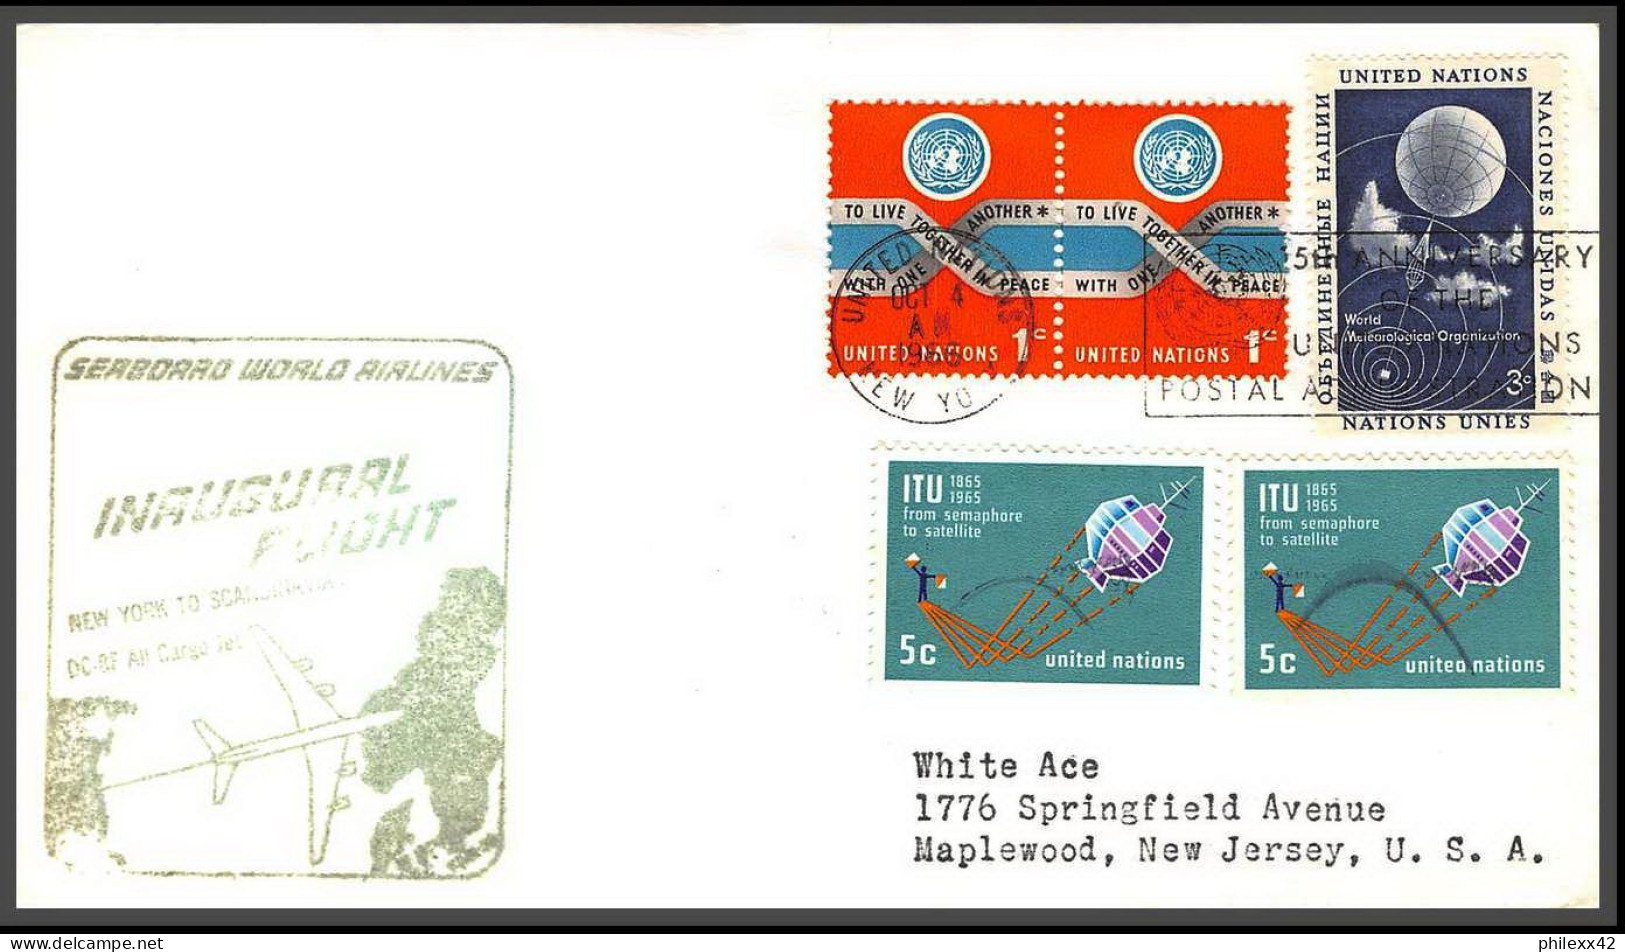 12657 Seaboard World Airlines 4/10/1966 Premier Vol First Flight Lettre Usa New York Scandinavia United Nations - Airplanes